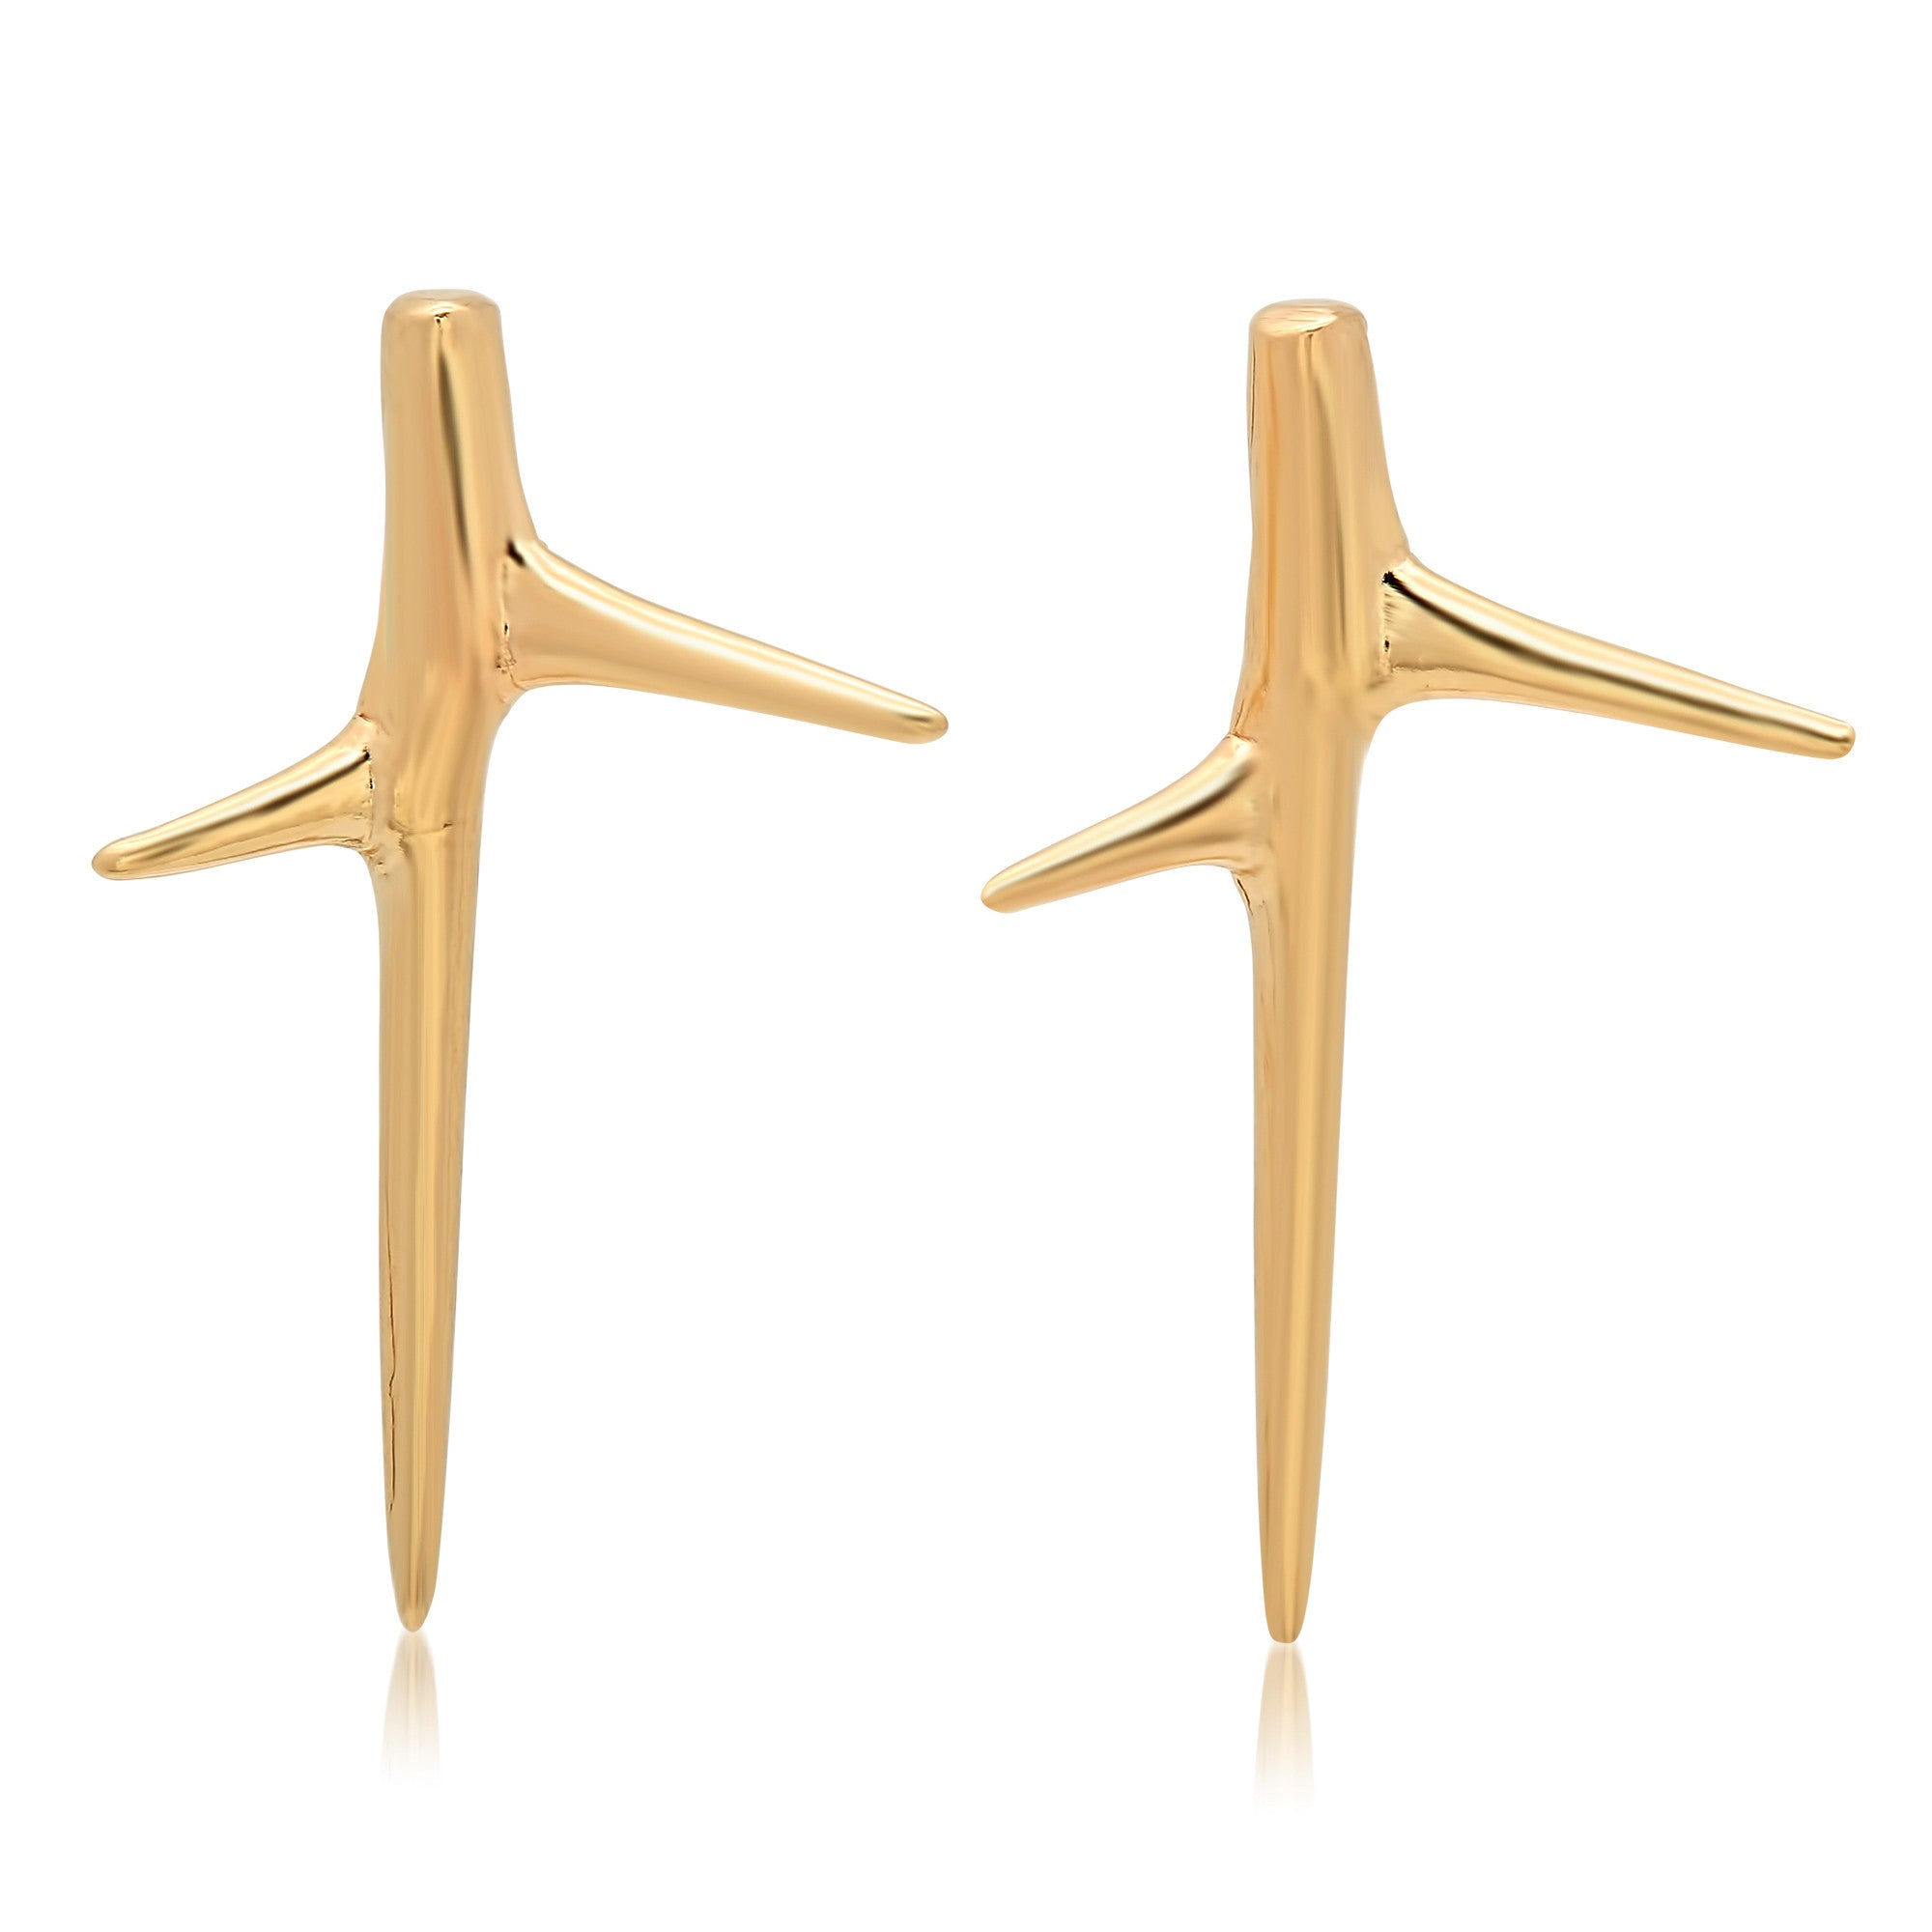 Thorn Studs Stud Earrings Elisabeth Bell Jewelry Yellow Gold  